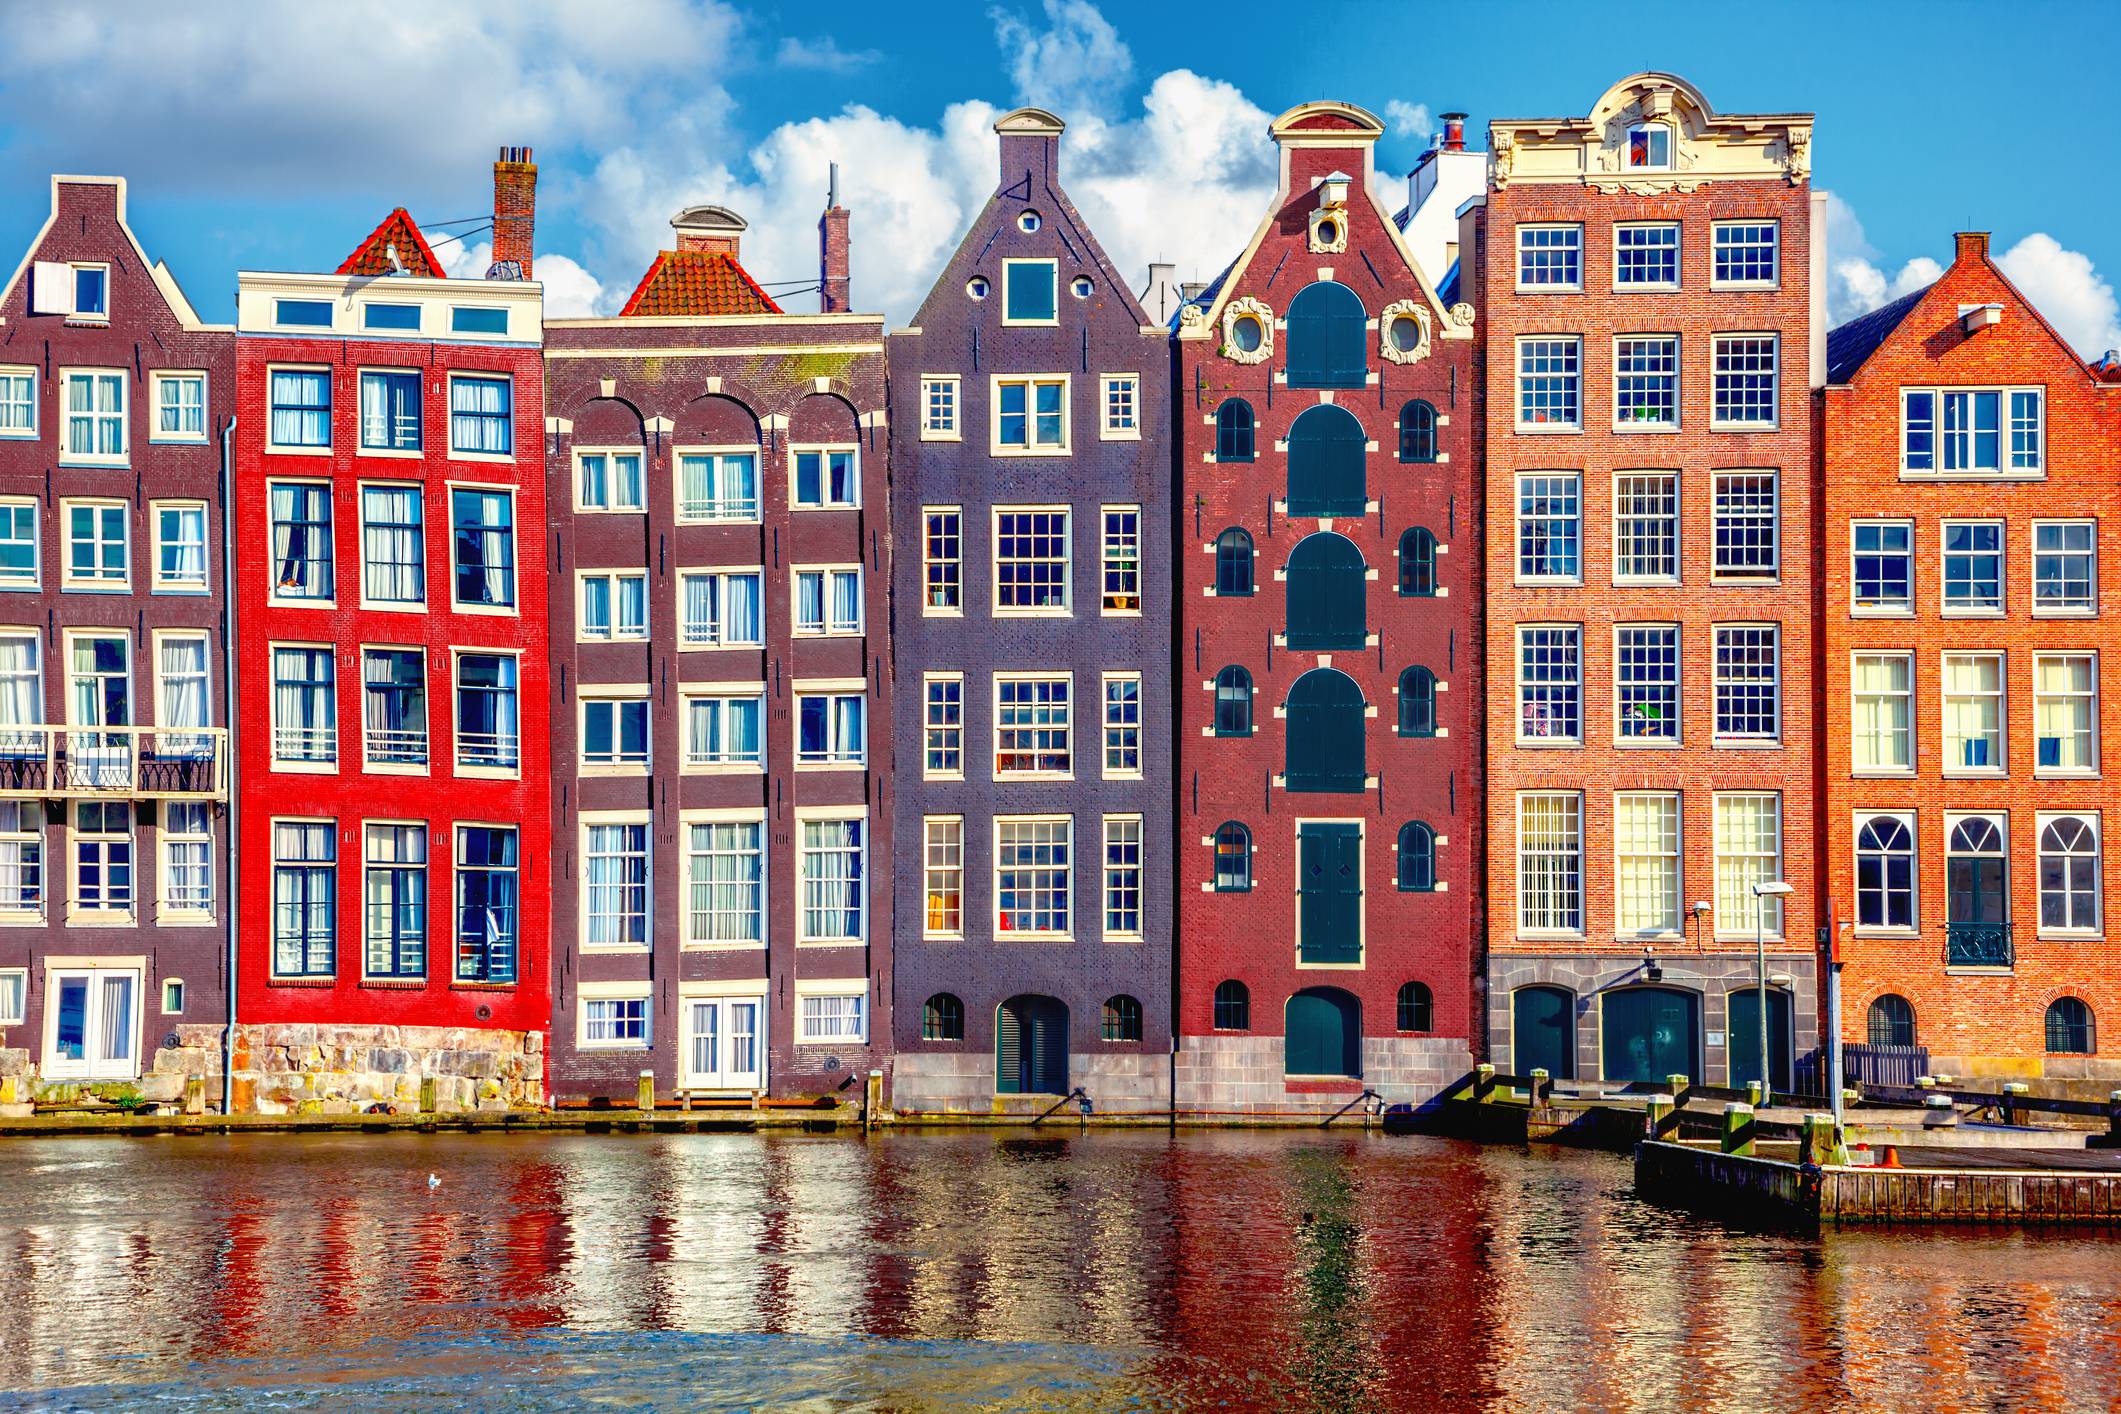 Why Are Amsterdam Houses Crooked and Leaning Forward?